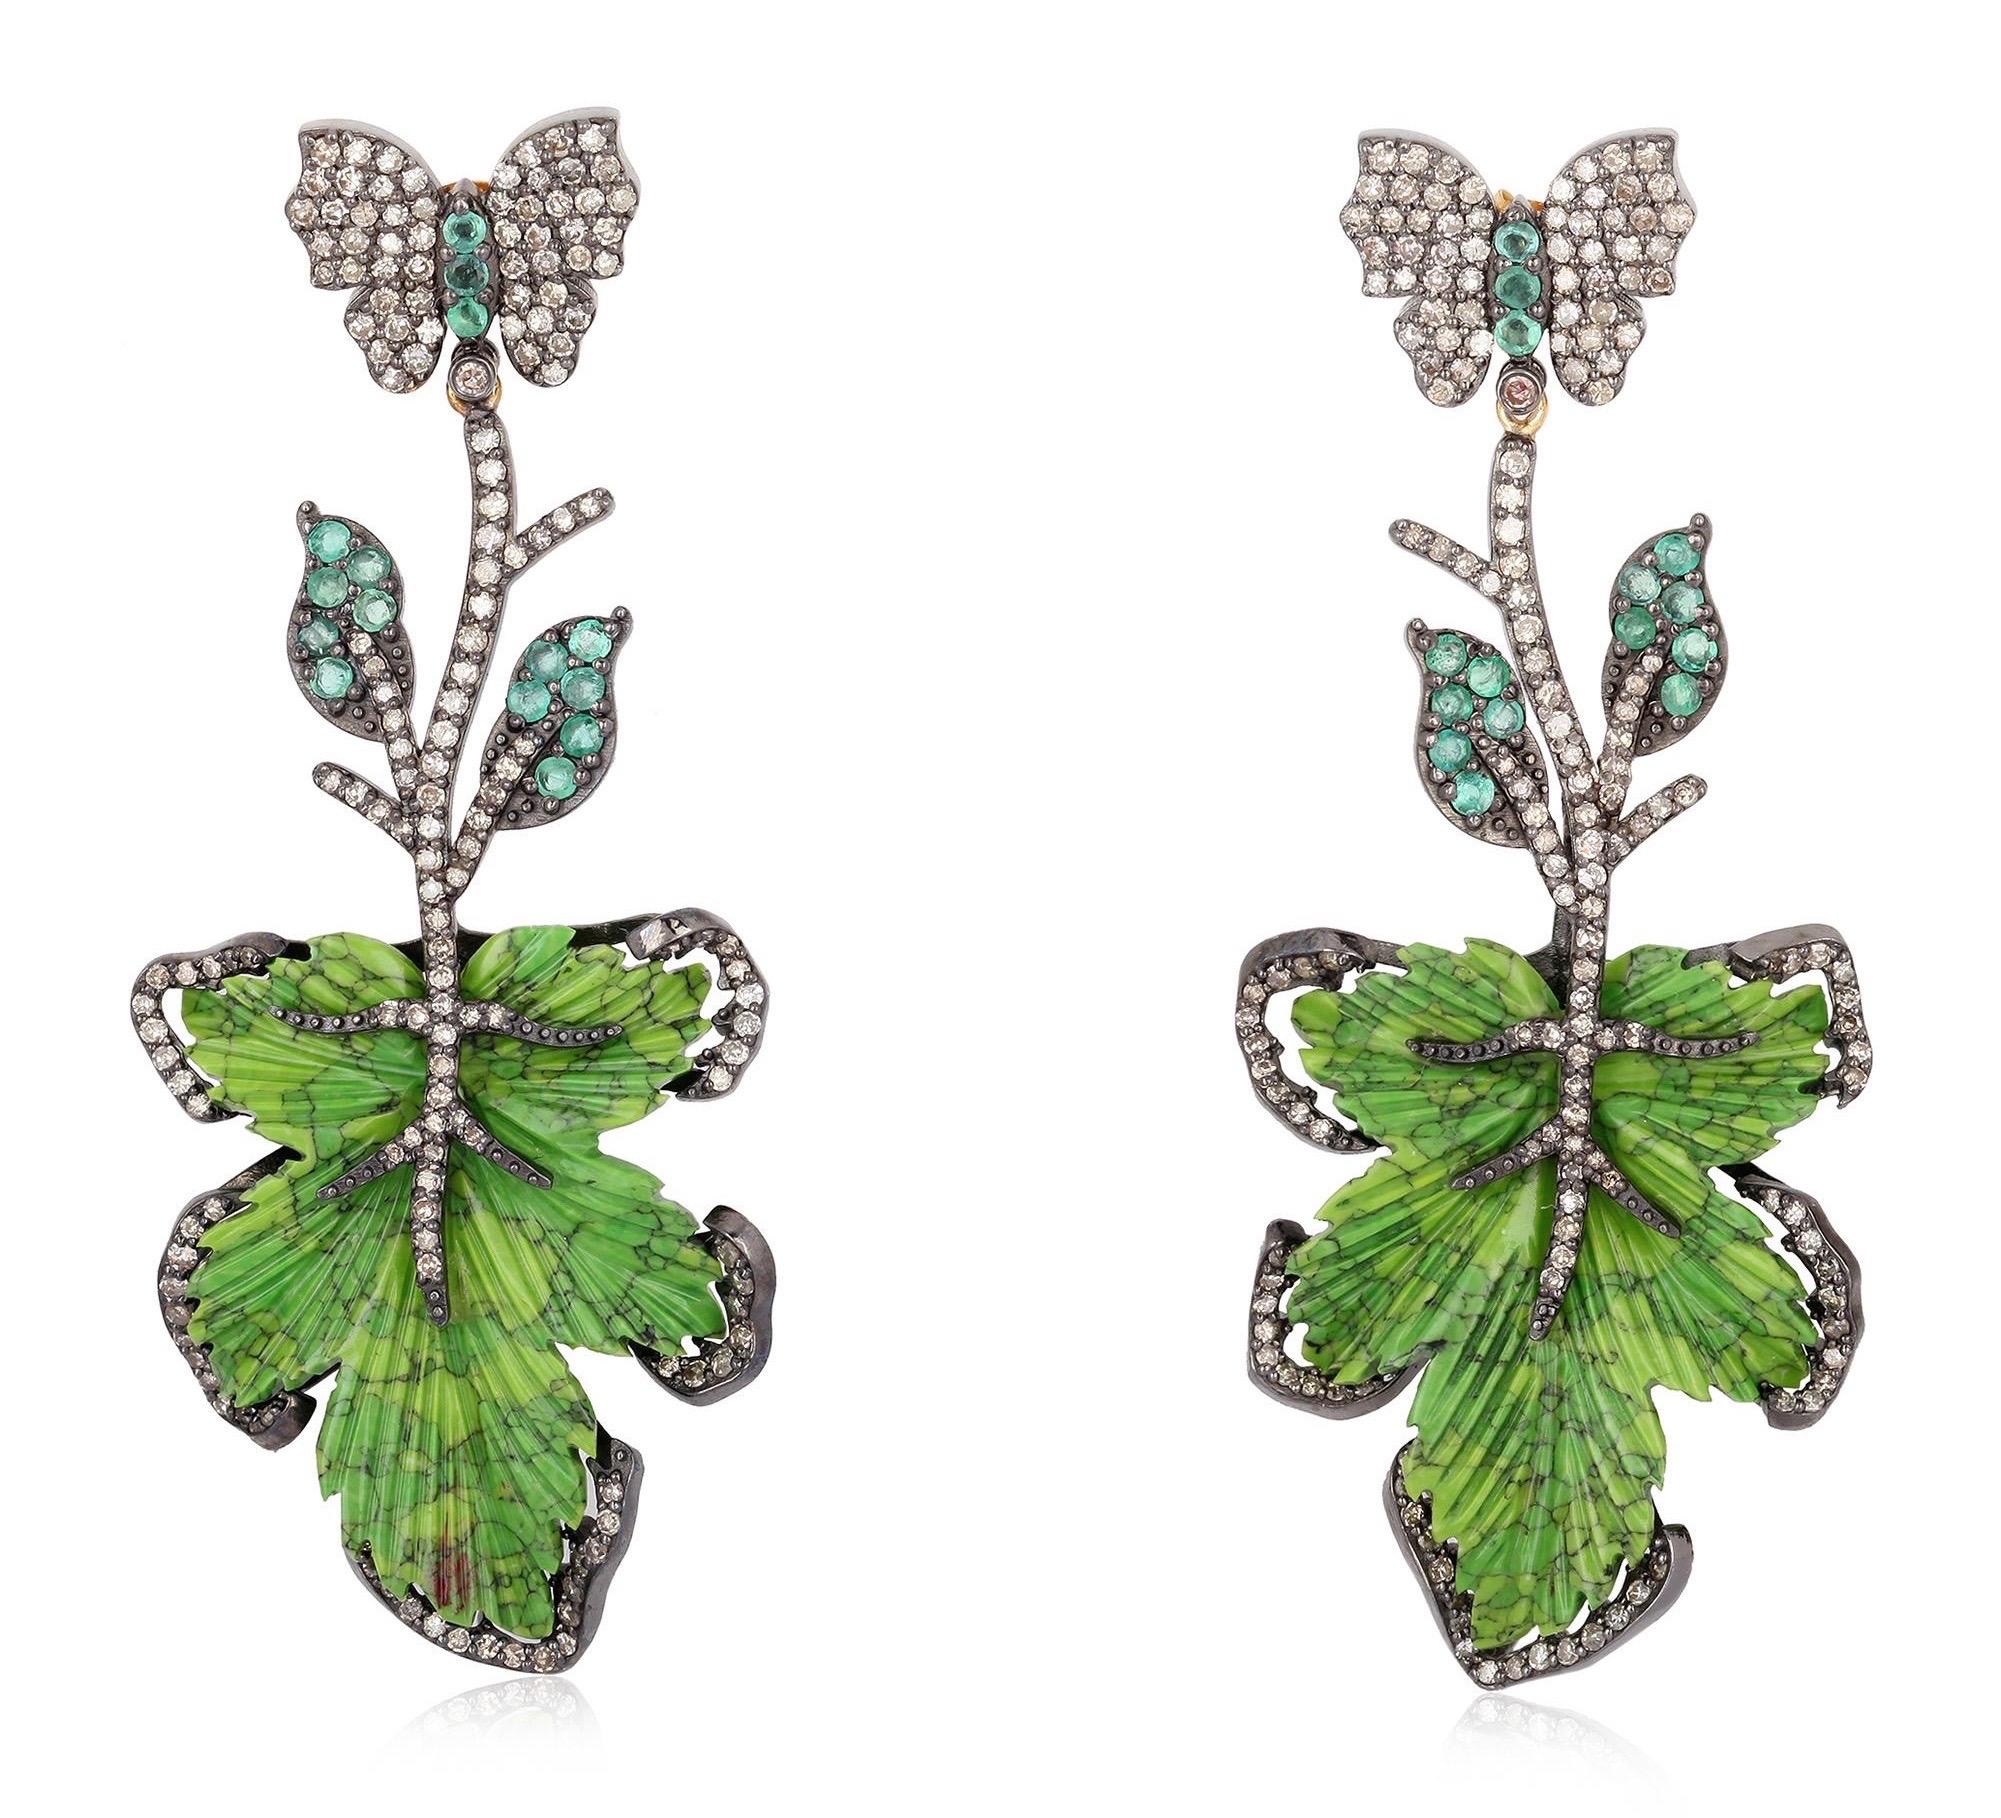 Mixed Cut Hand Carved 39.64 Carat Turquoise Emerald Diamond Leaf Earrings For Sale